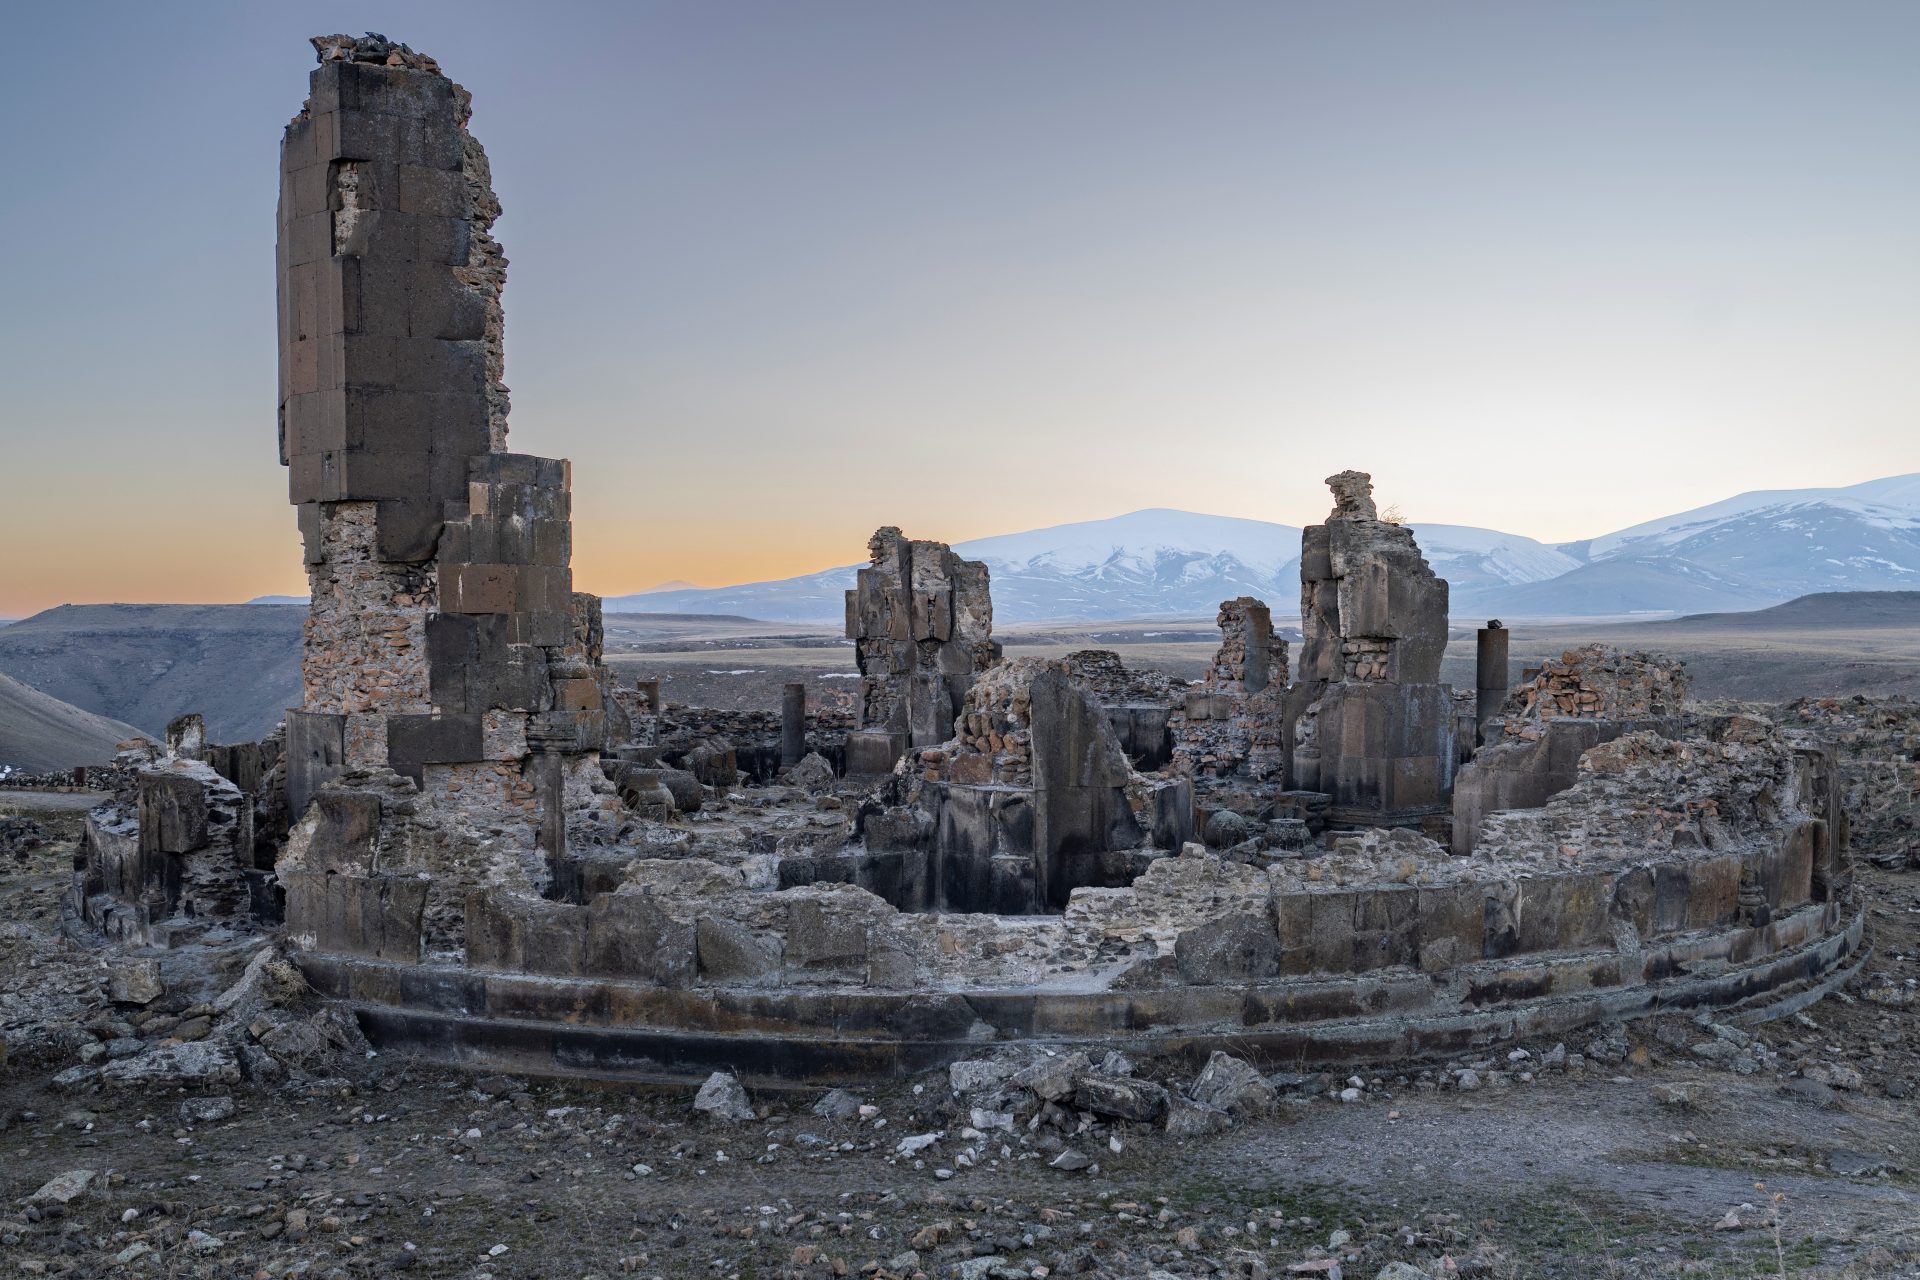 <p>Ani, a UNESCO World Heritage Site, used to be a flourishing medieval city with more than fifty churches, thirty caves, and twenty chapels discovered to this day. It's an archaeological site with impressive ruins and historical monuments near the Turkish-Armenian border.</p>